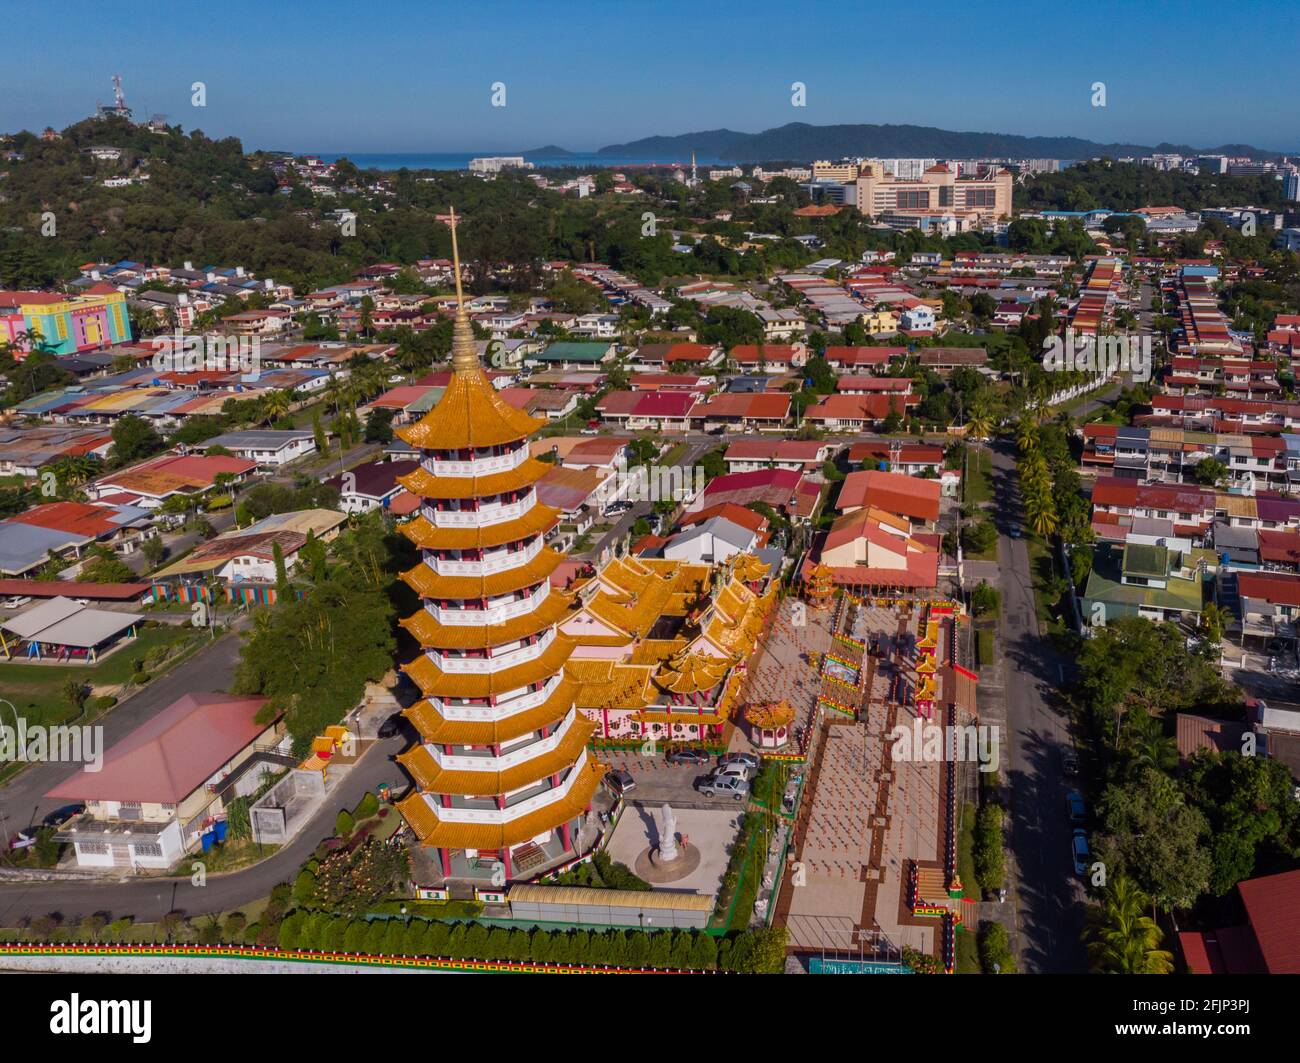 Aerial view image of Chinese Temple Peak Nam Toong Pagoda located in the city of Kota Kinabalu, Sabah, Malaysia. Stock Photo